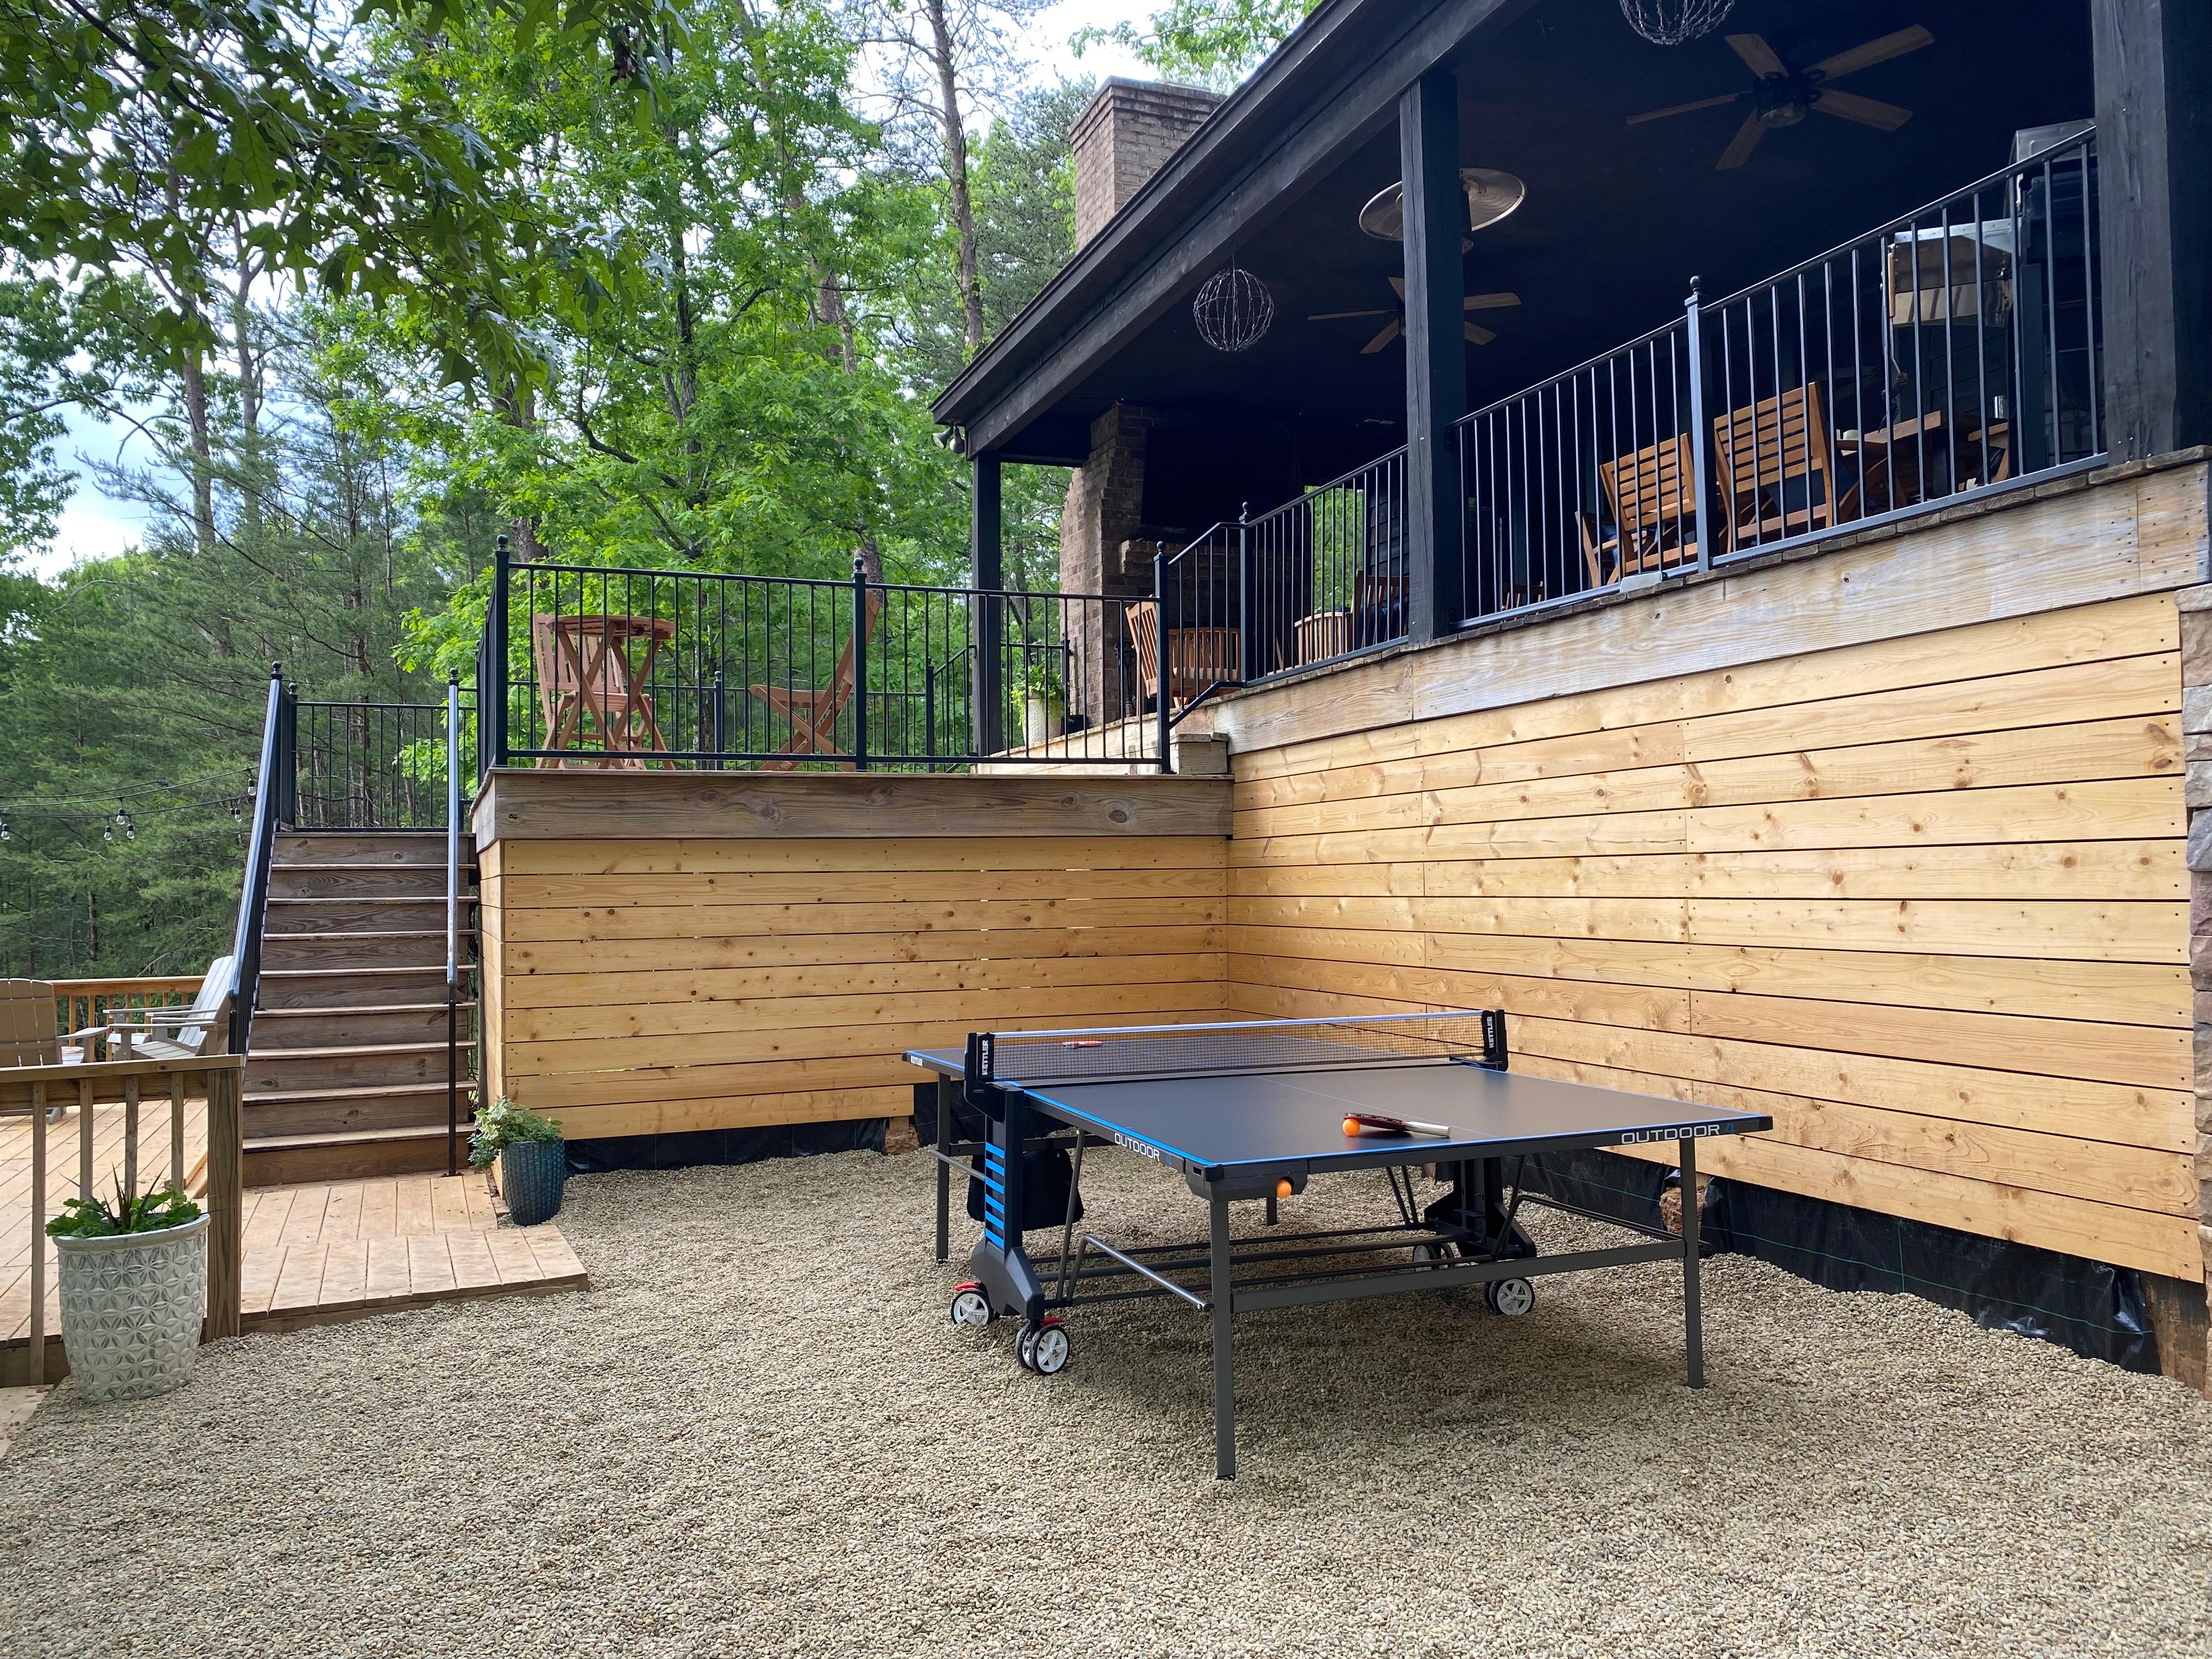 Blue Haven Lake House has a wonderful outdoor space. You can participate in ping pong or enjoy the nice Alabama weather on the plentiful seating!